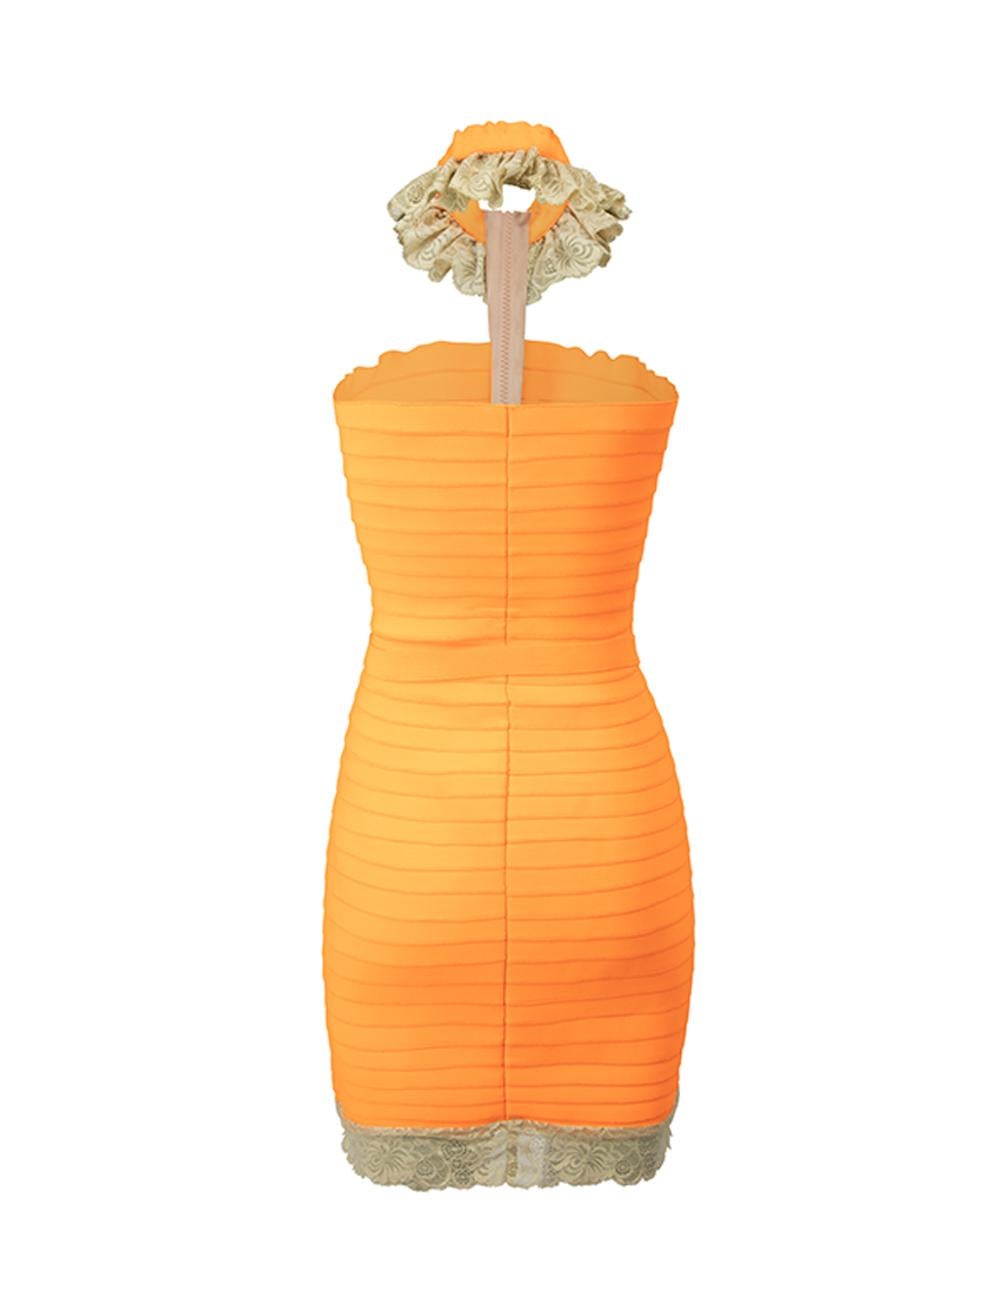 Christopher Kane Women's Orange Spring 2007 Lace Accent Bandage Dress In Good Condition For Sale In London, GB